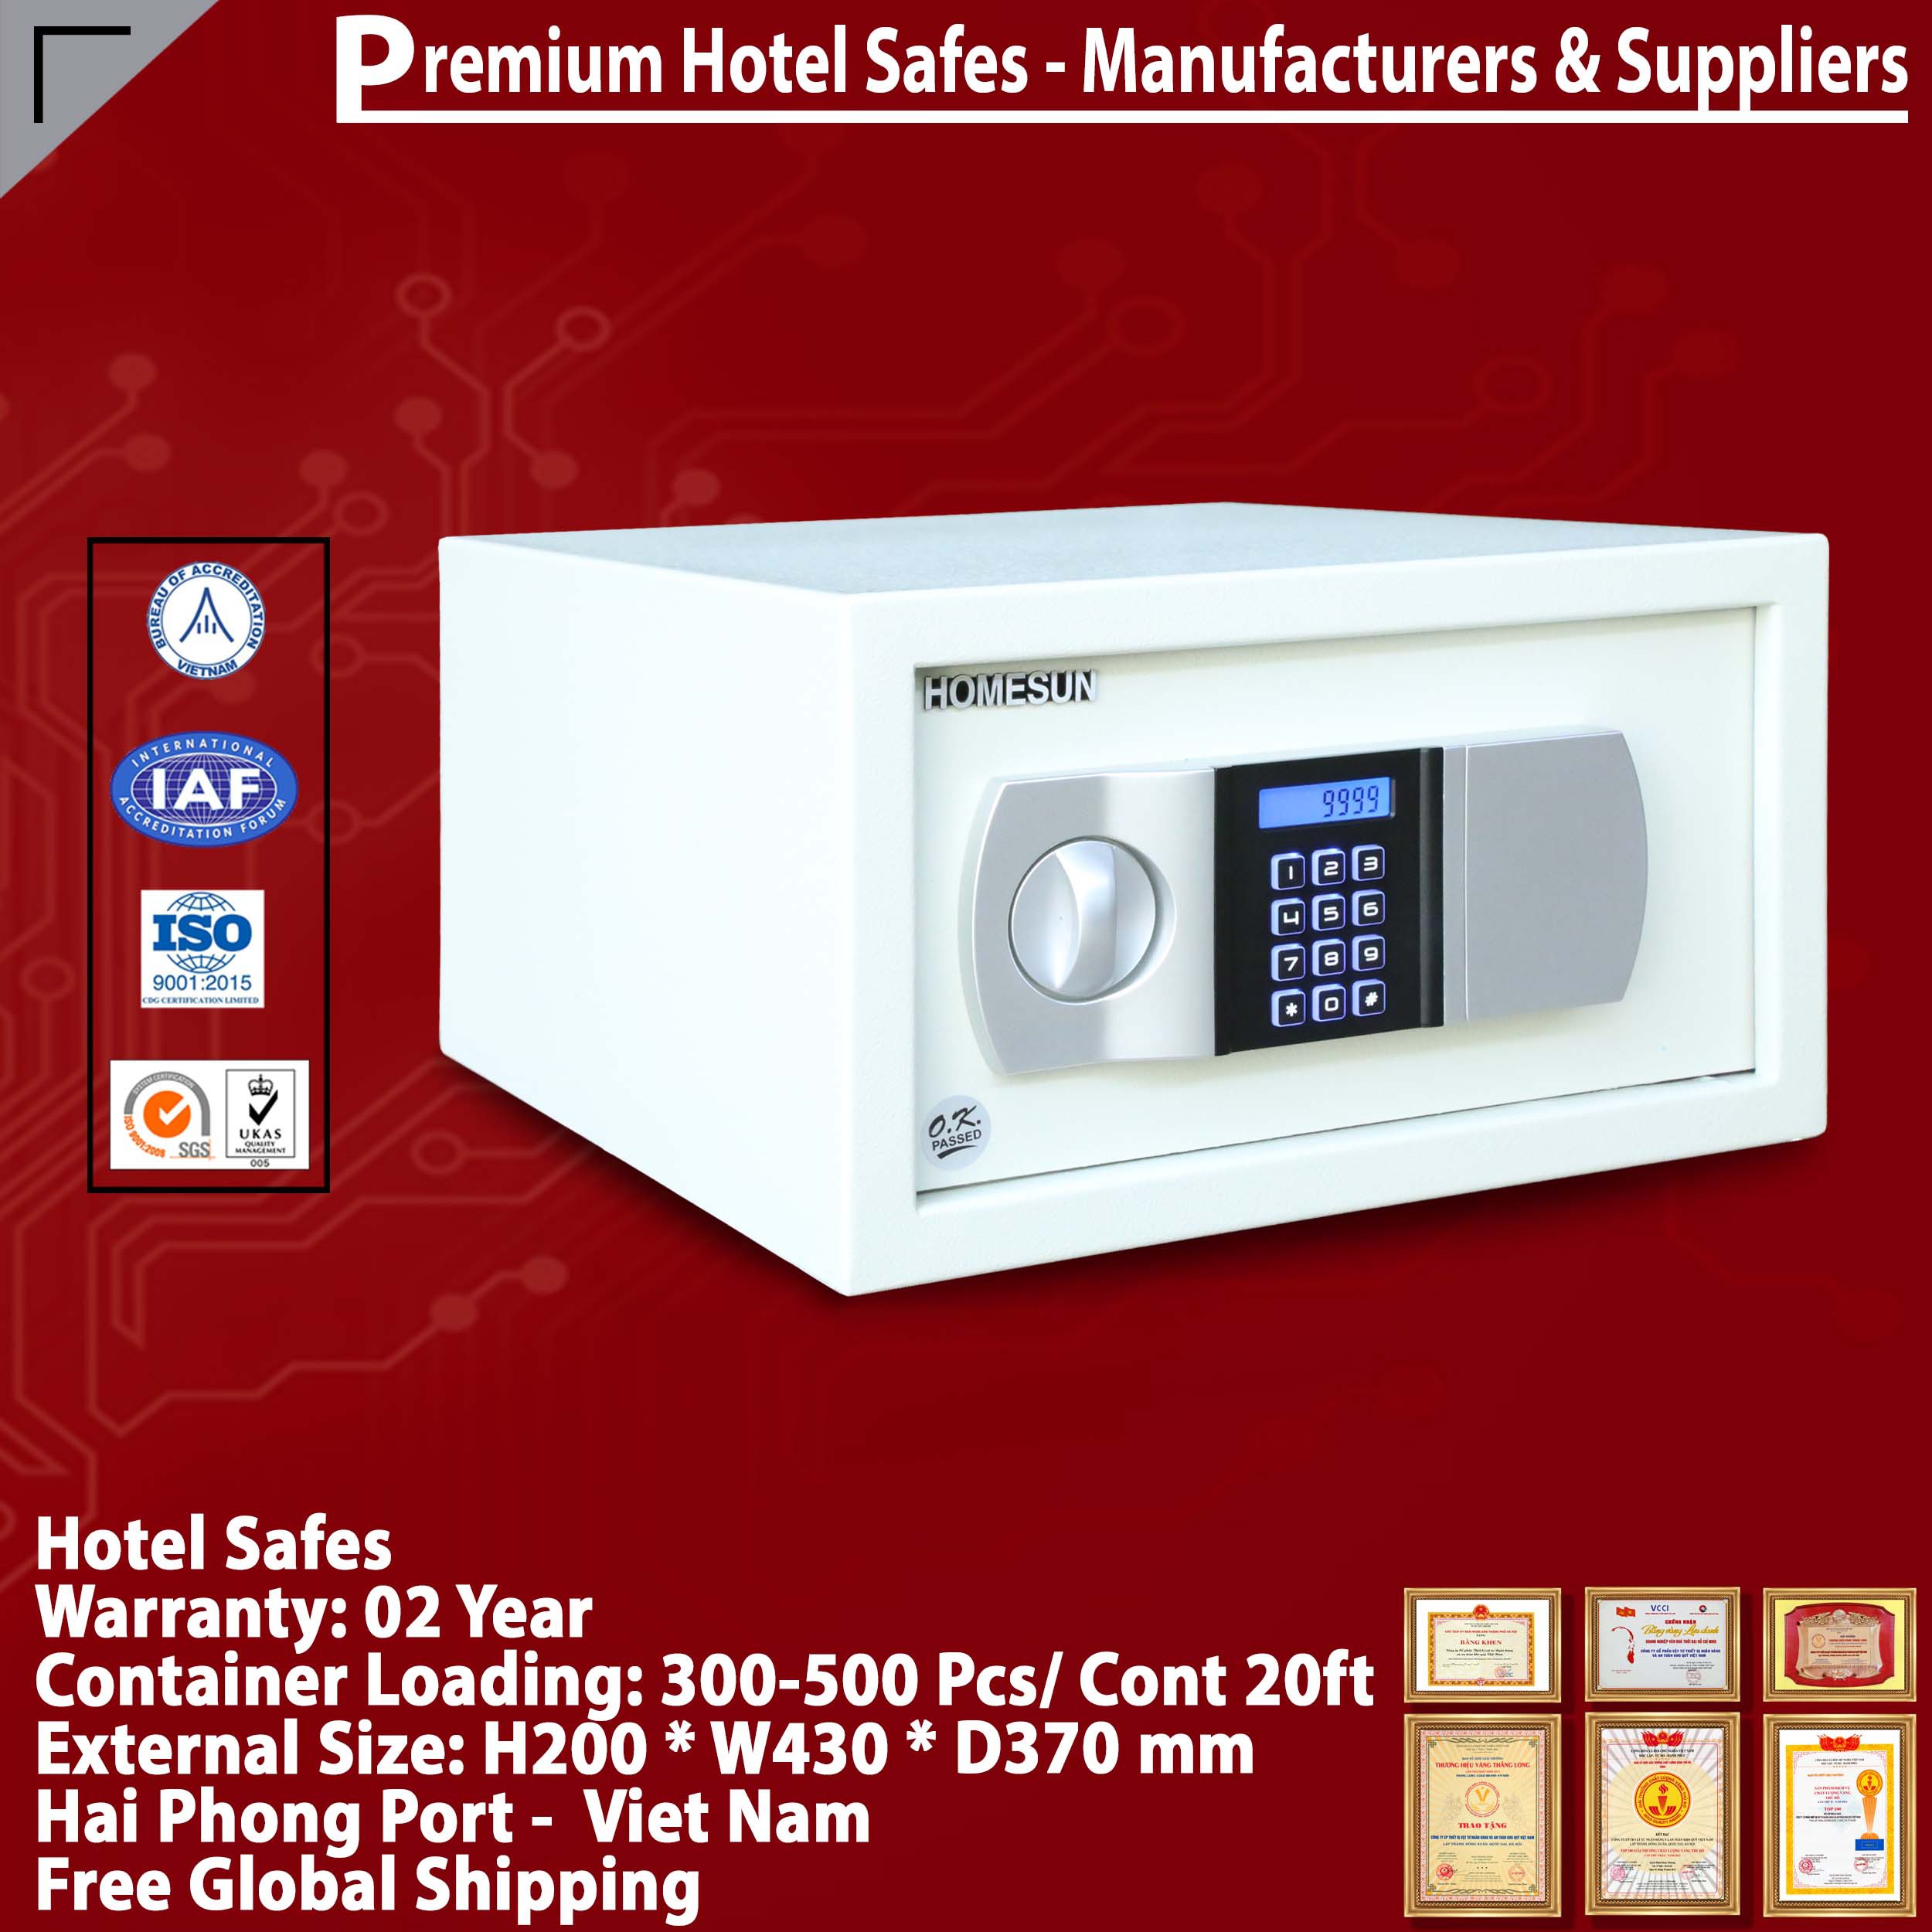 Room Hotel Safety Deposit Box Manufacturing Facilit for sale online